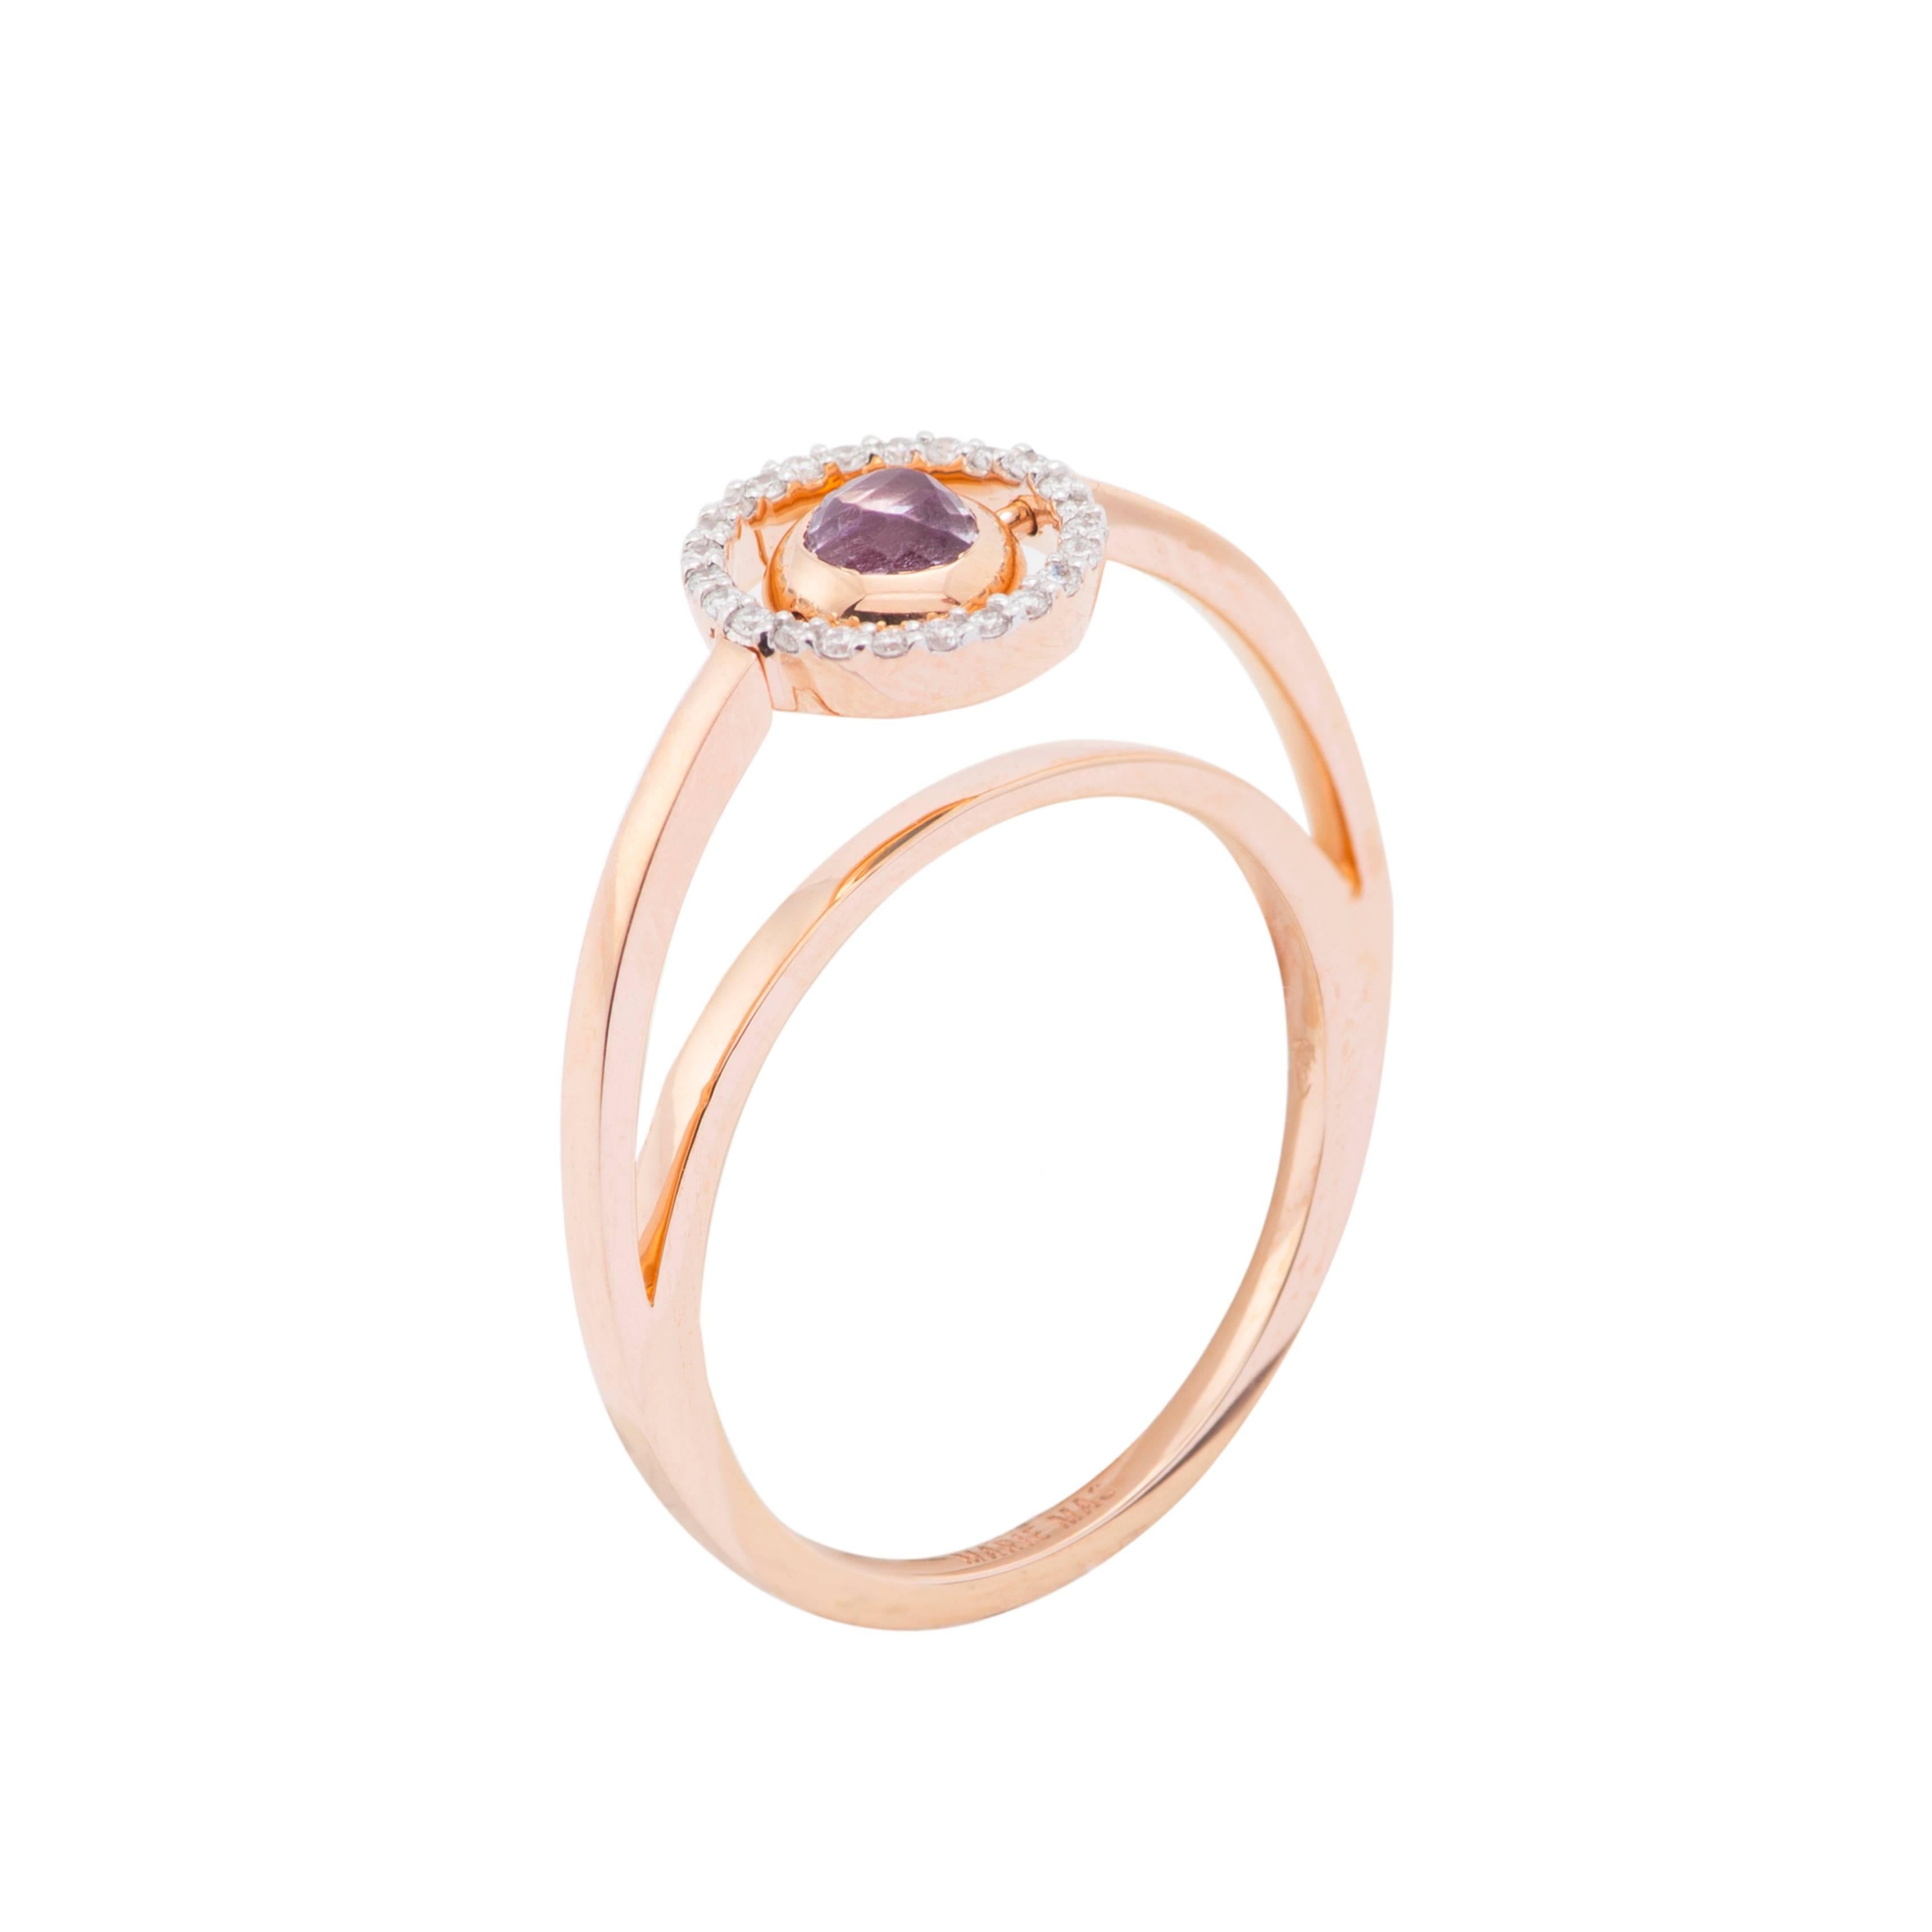 This Swiveling Ring is designed by the French Jewelry brand Marie Mas. 
The ring is 18 Karat Rose Gold, with Diamonds, Pink Amethyst and London Blue Topaz. The center stone is reversible : there is a Pink Amethyst and a London Blue Topaz back to